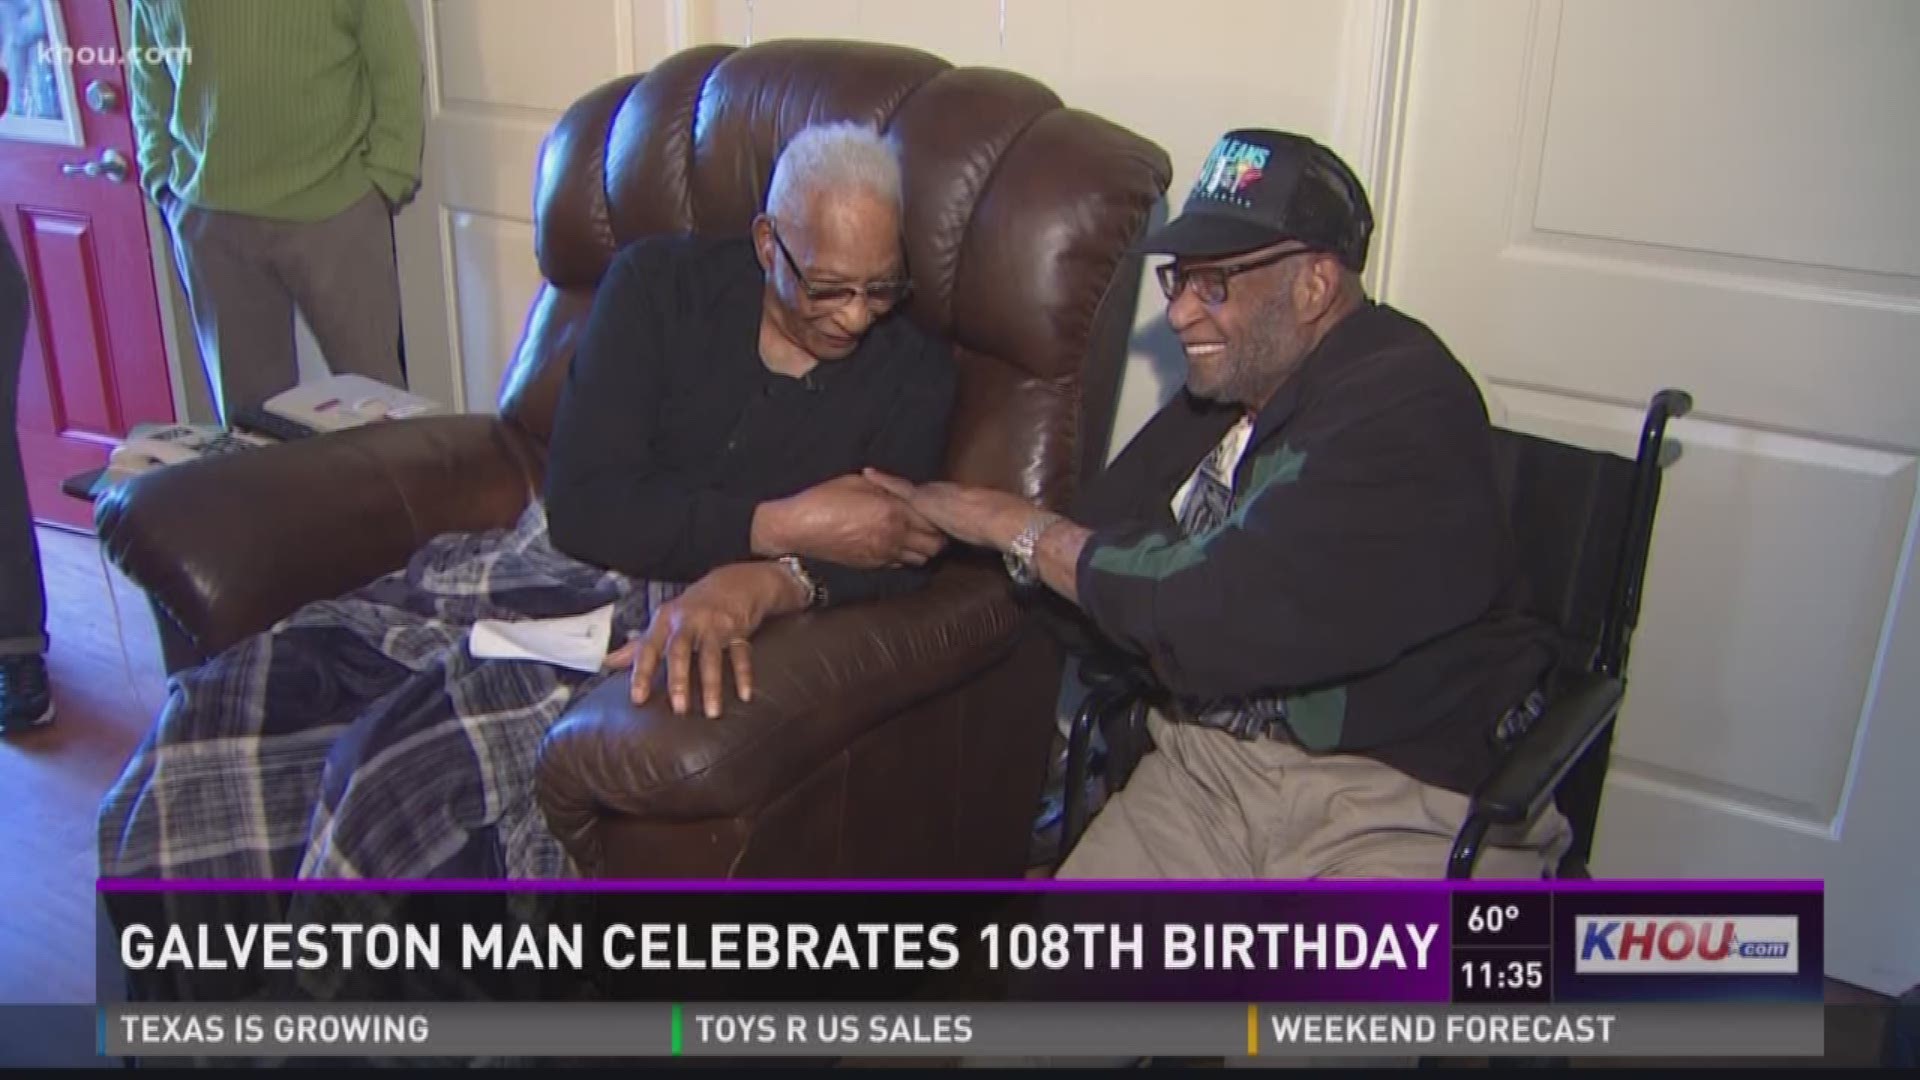 Melvin Campbell is a full decade older than his kid brother Hurbert and celebrated his 108th birthday by entertaining family with unintentional humor.